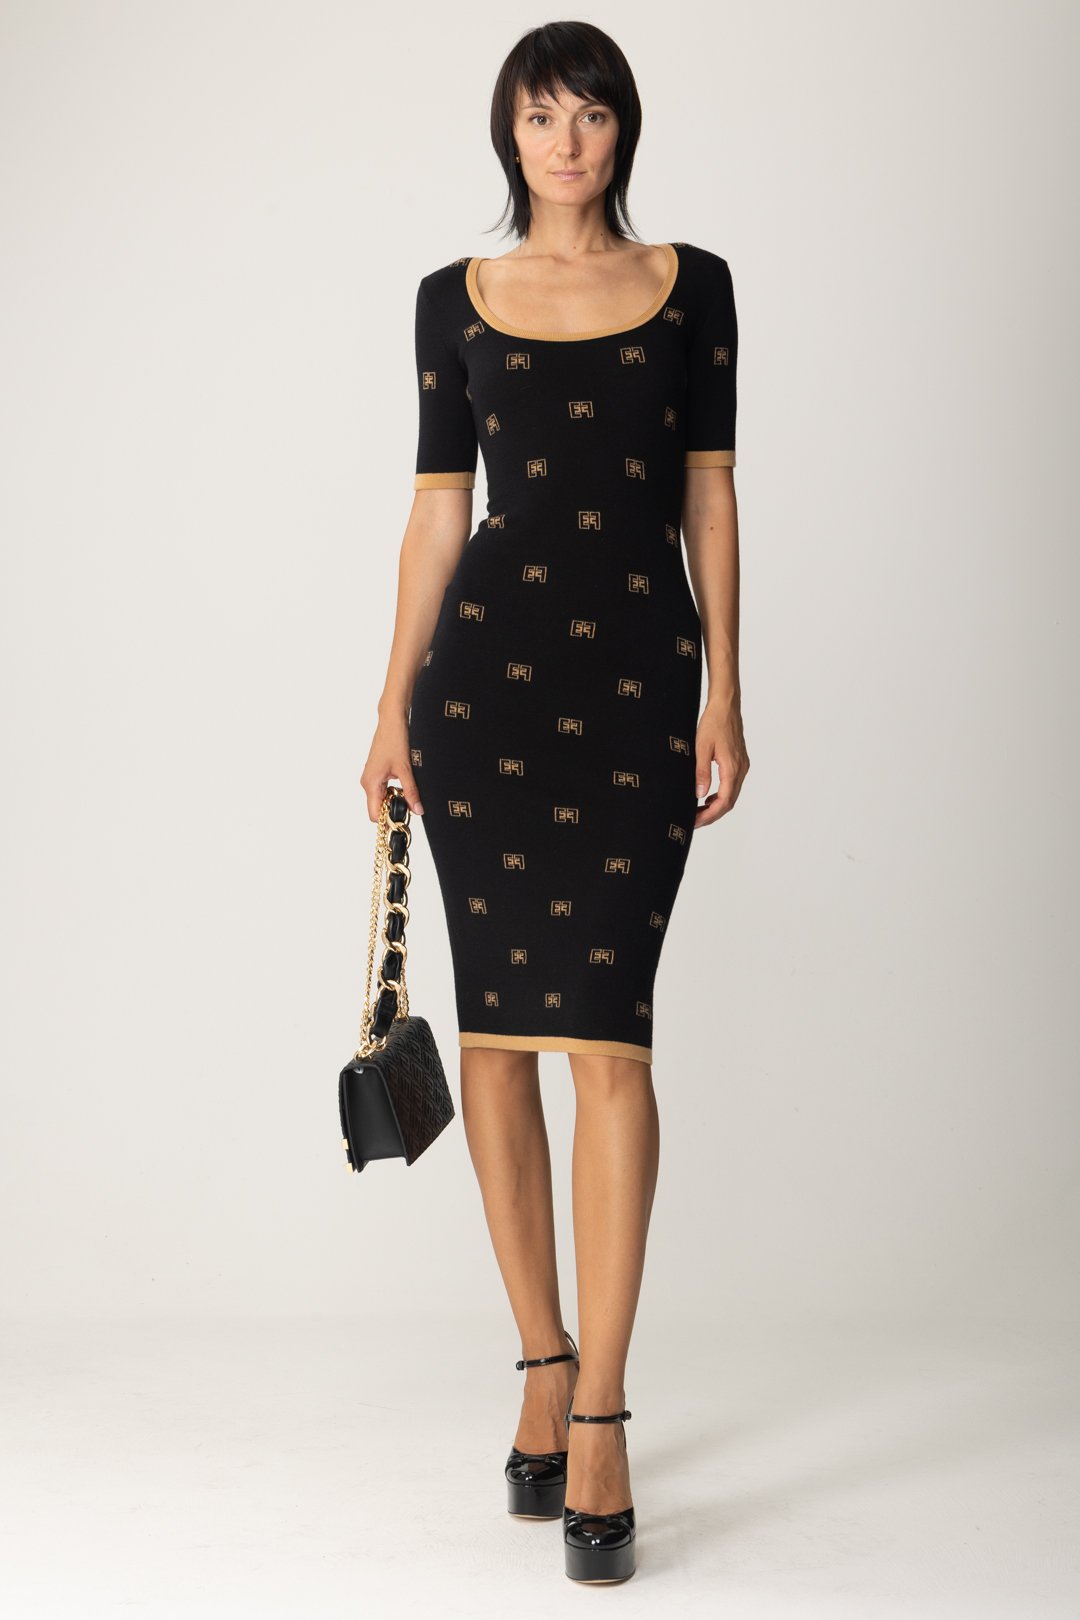 Preview: Elisabetta Franchi Knitted midi dress with belt and logo print NERO/CARAMELLO